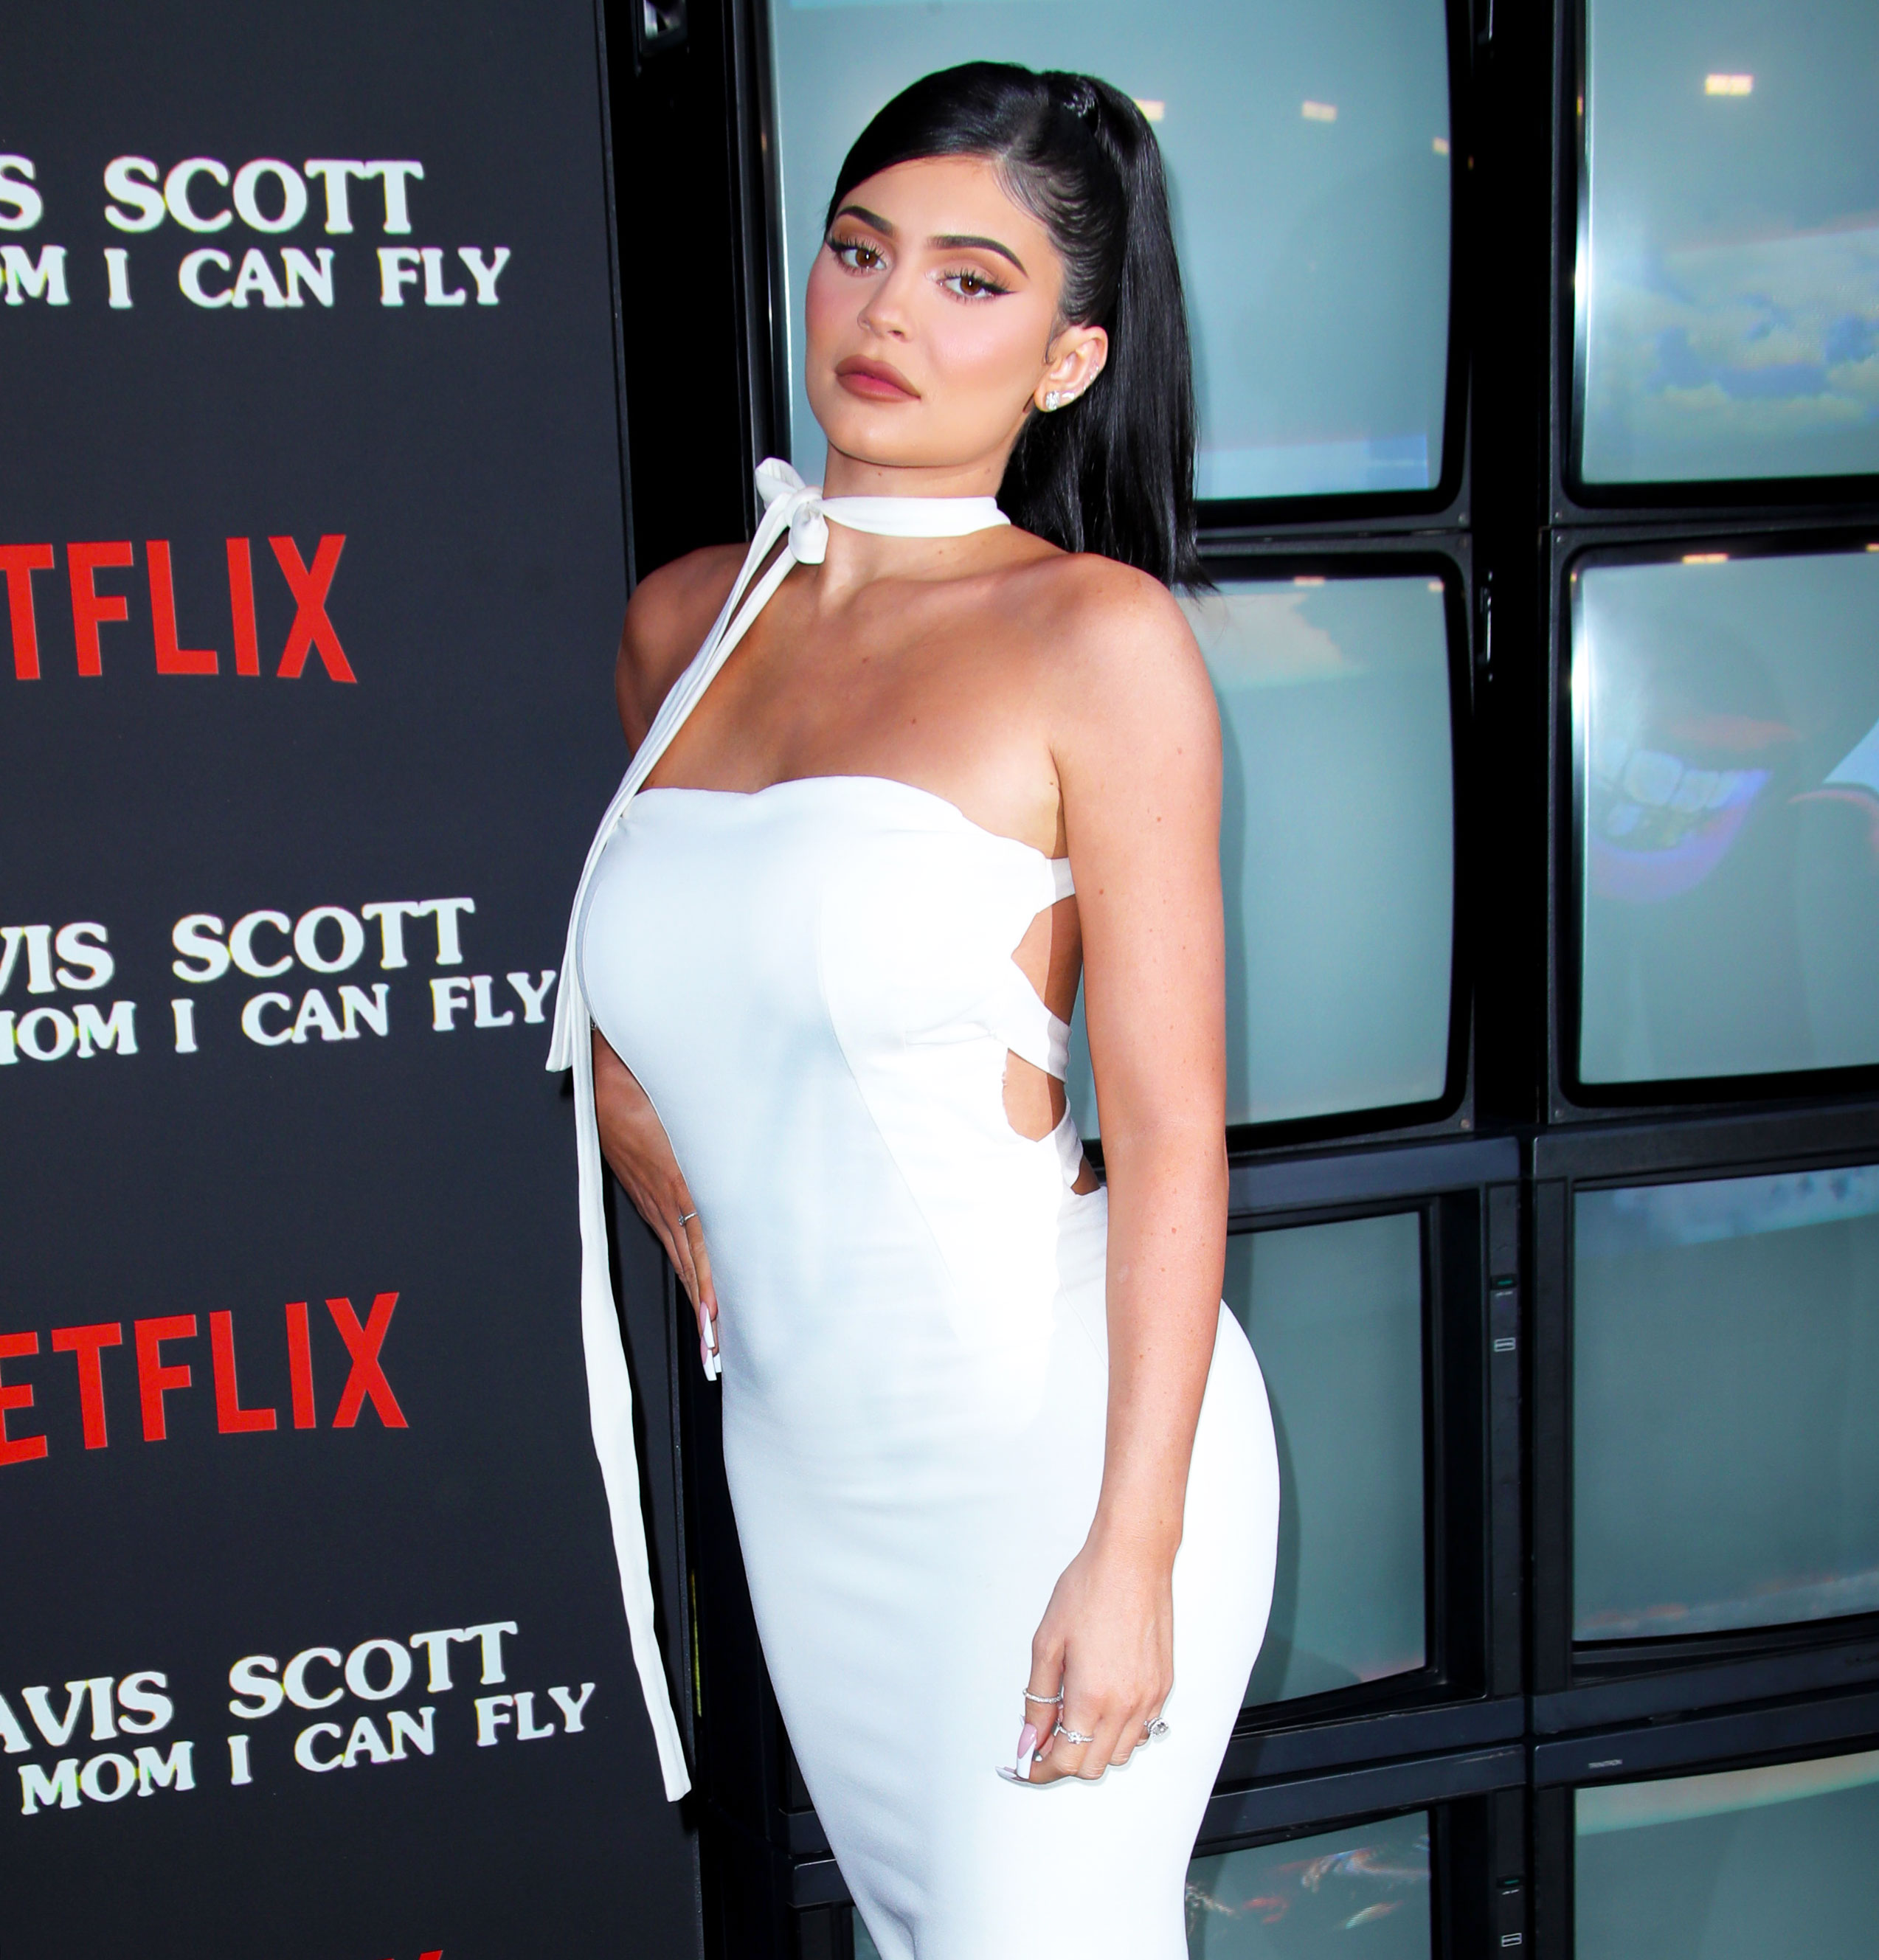 Kylie Jenner Says She 'Doesn't Want Another Baby Right Now'